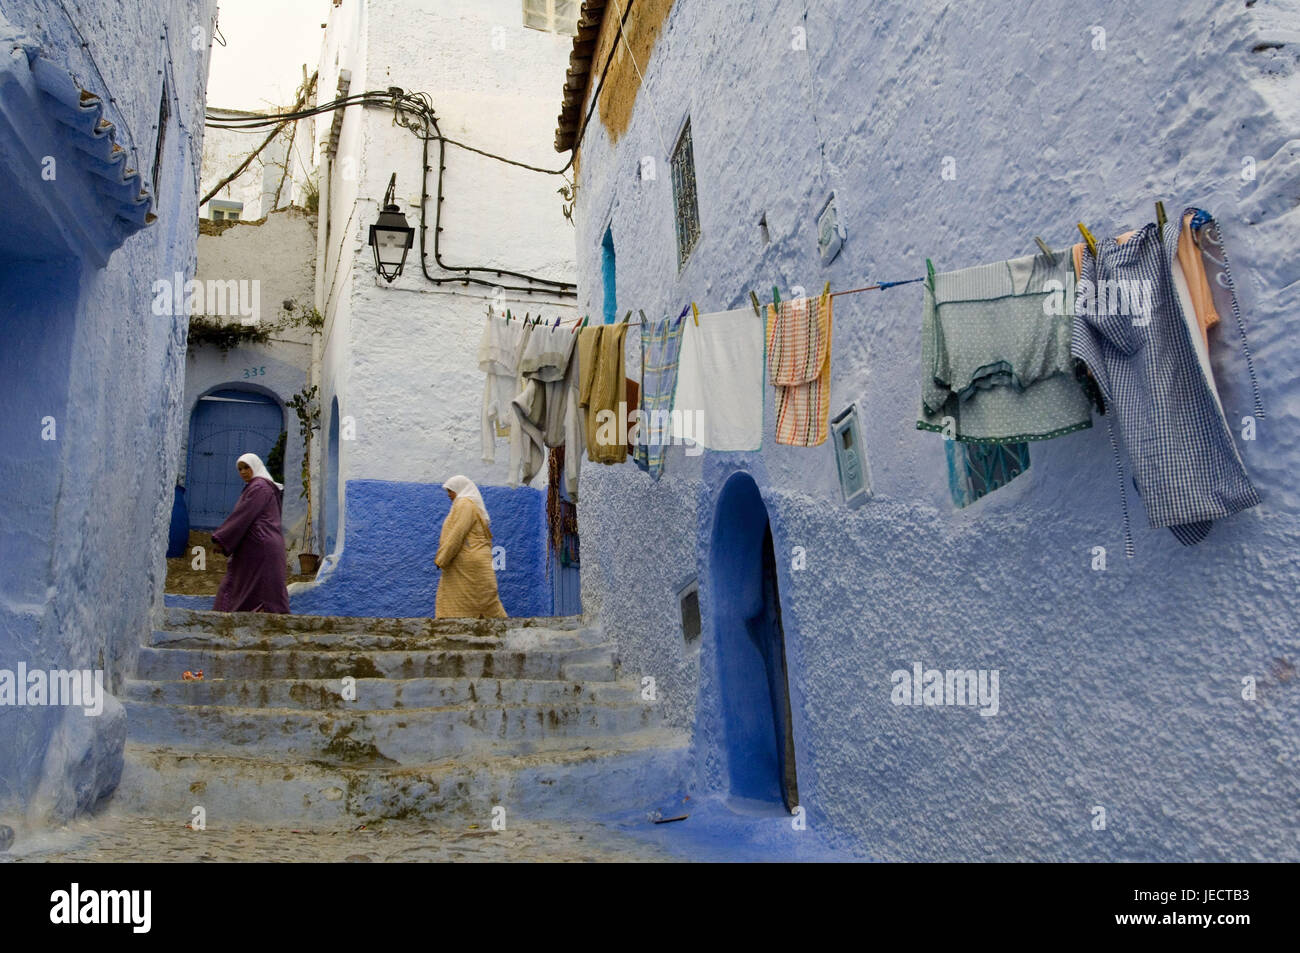 Morocco, Chefchaouen, lane, house facades, rope, laundry, women, no model release, Africa, house, building, house defensive walls, defensive walls, residential houses, facades, blue, architectural style, architecture, place of interest, person, stairs, clothesline, washday, laundry pieces, dry, outside, Stock Photo